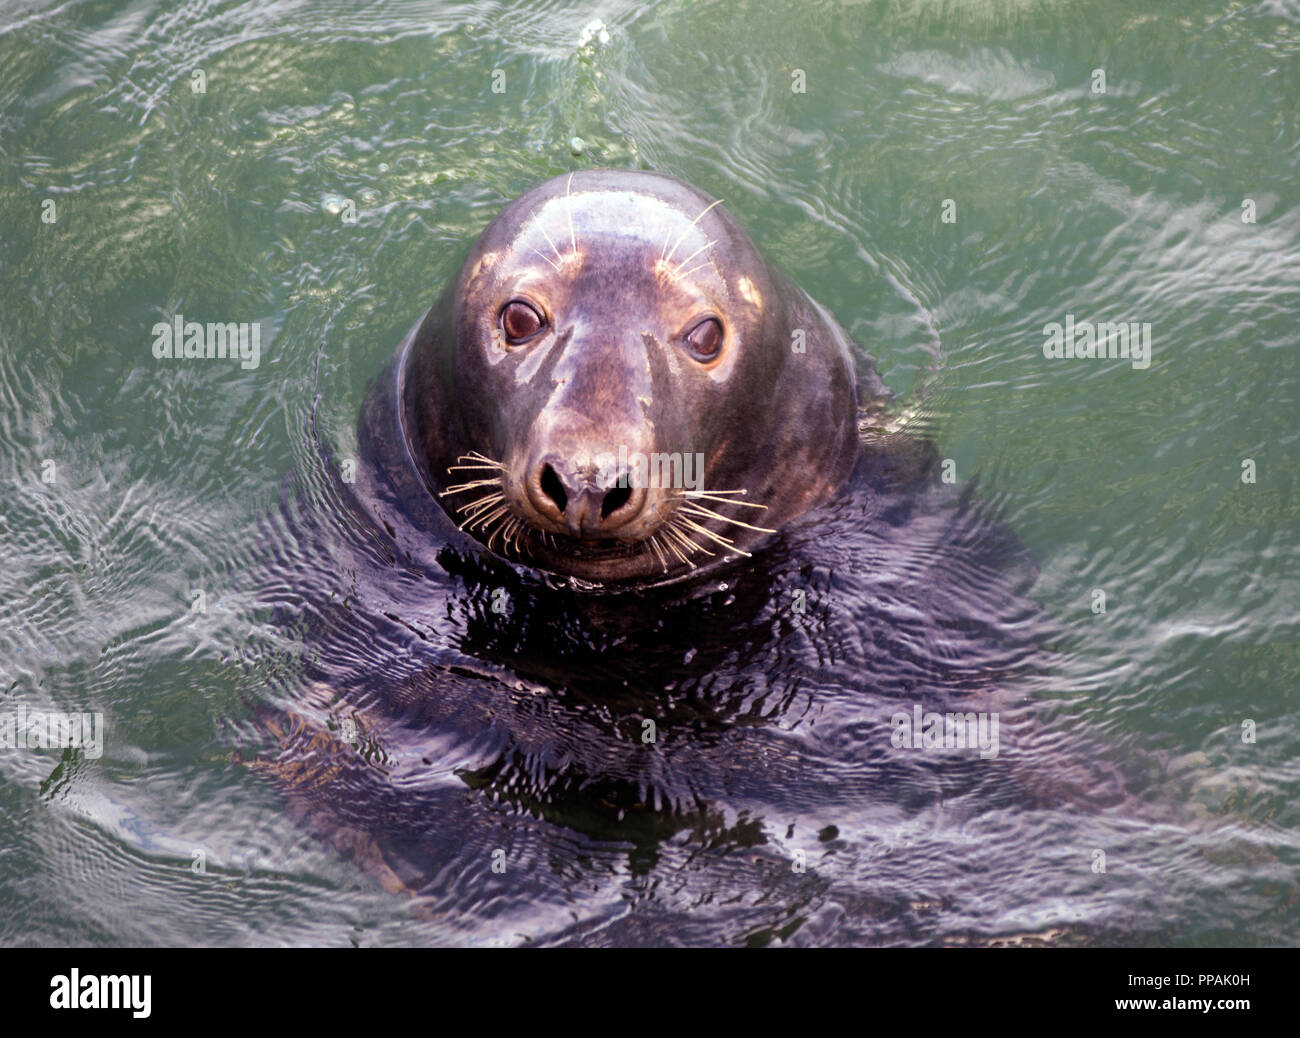 A Grey Seal (Halichoerus grypus) in the harbor at Chatham, Massachusetts on Cape Cod, USA Stock Photo